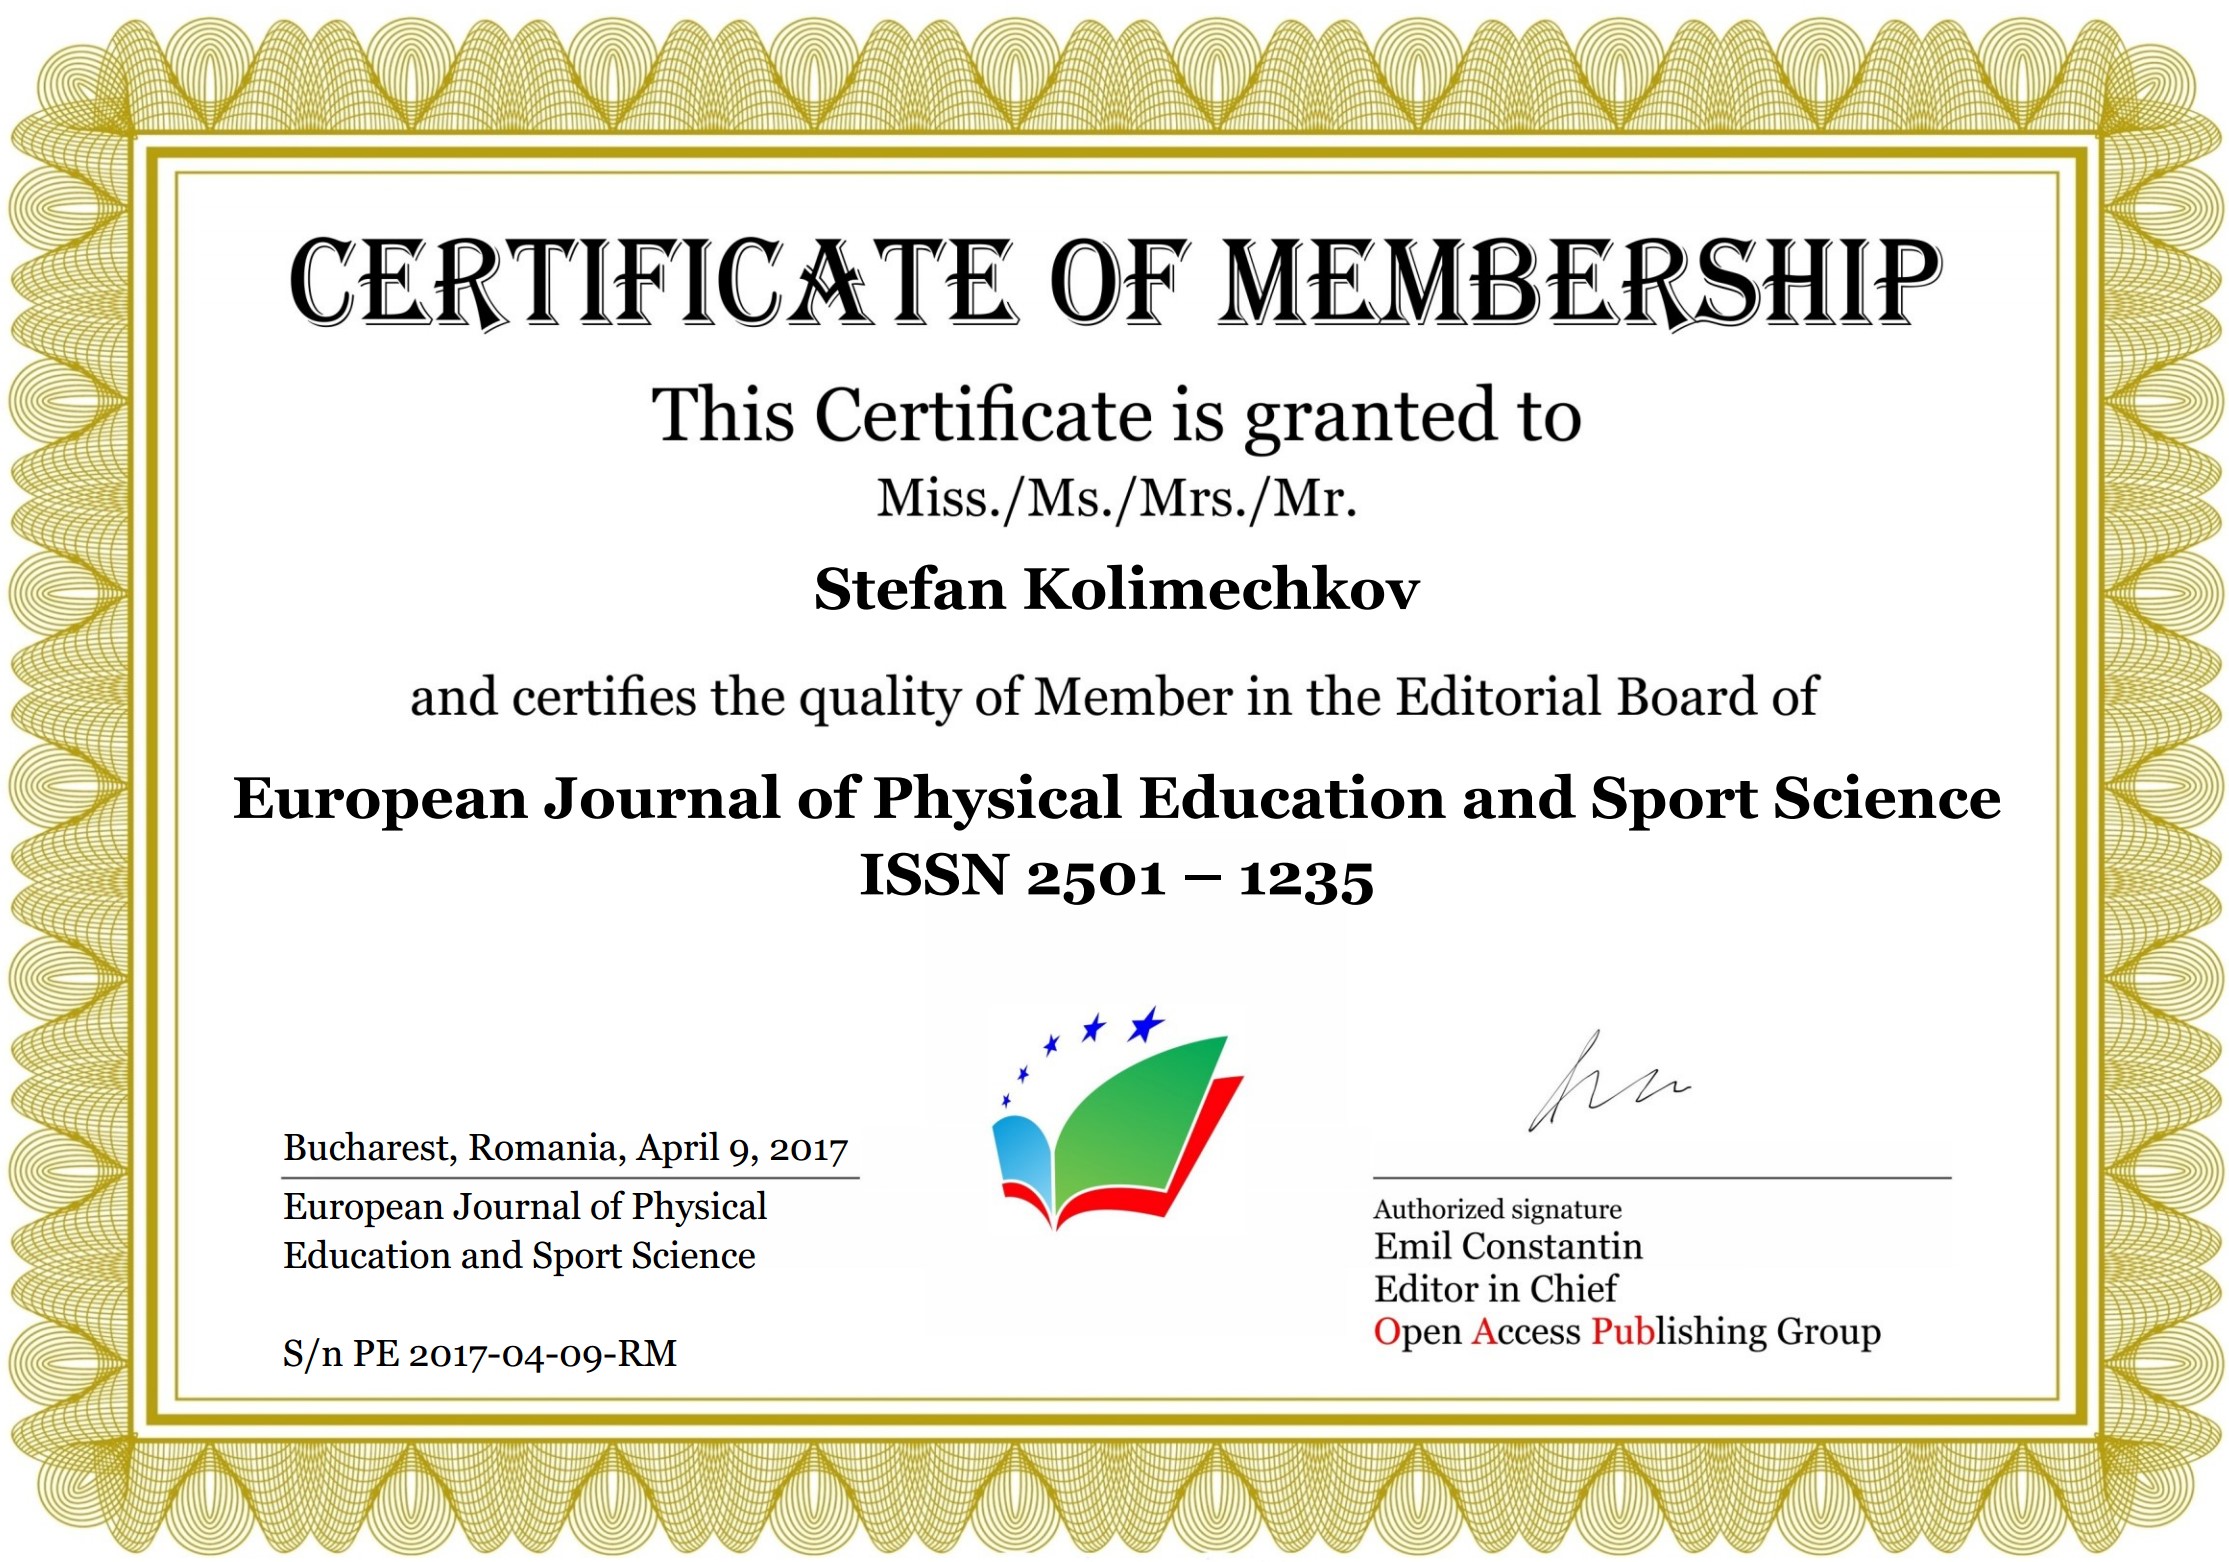 Dr Stefan Kolimechkov is the Editor-in-Chief of the European Journal of Physical Education and Sport Science (ISSN 2501 - 1235)